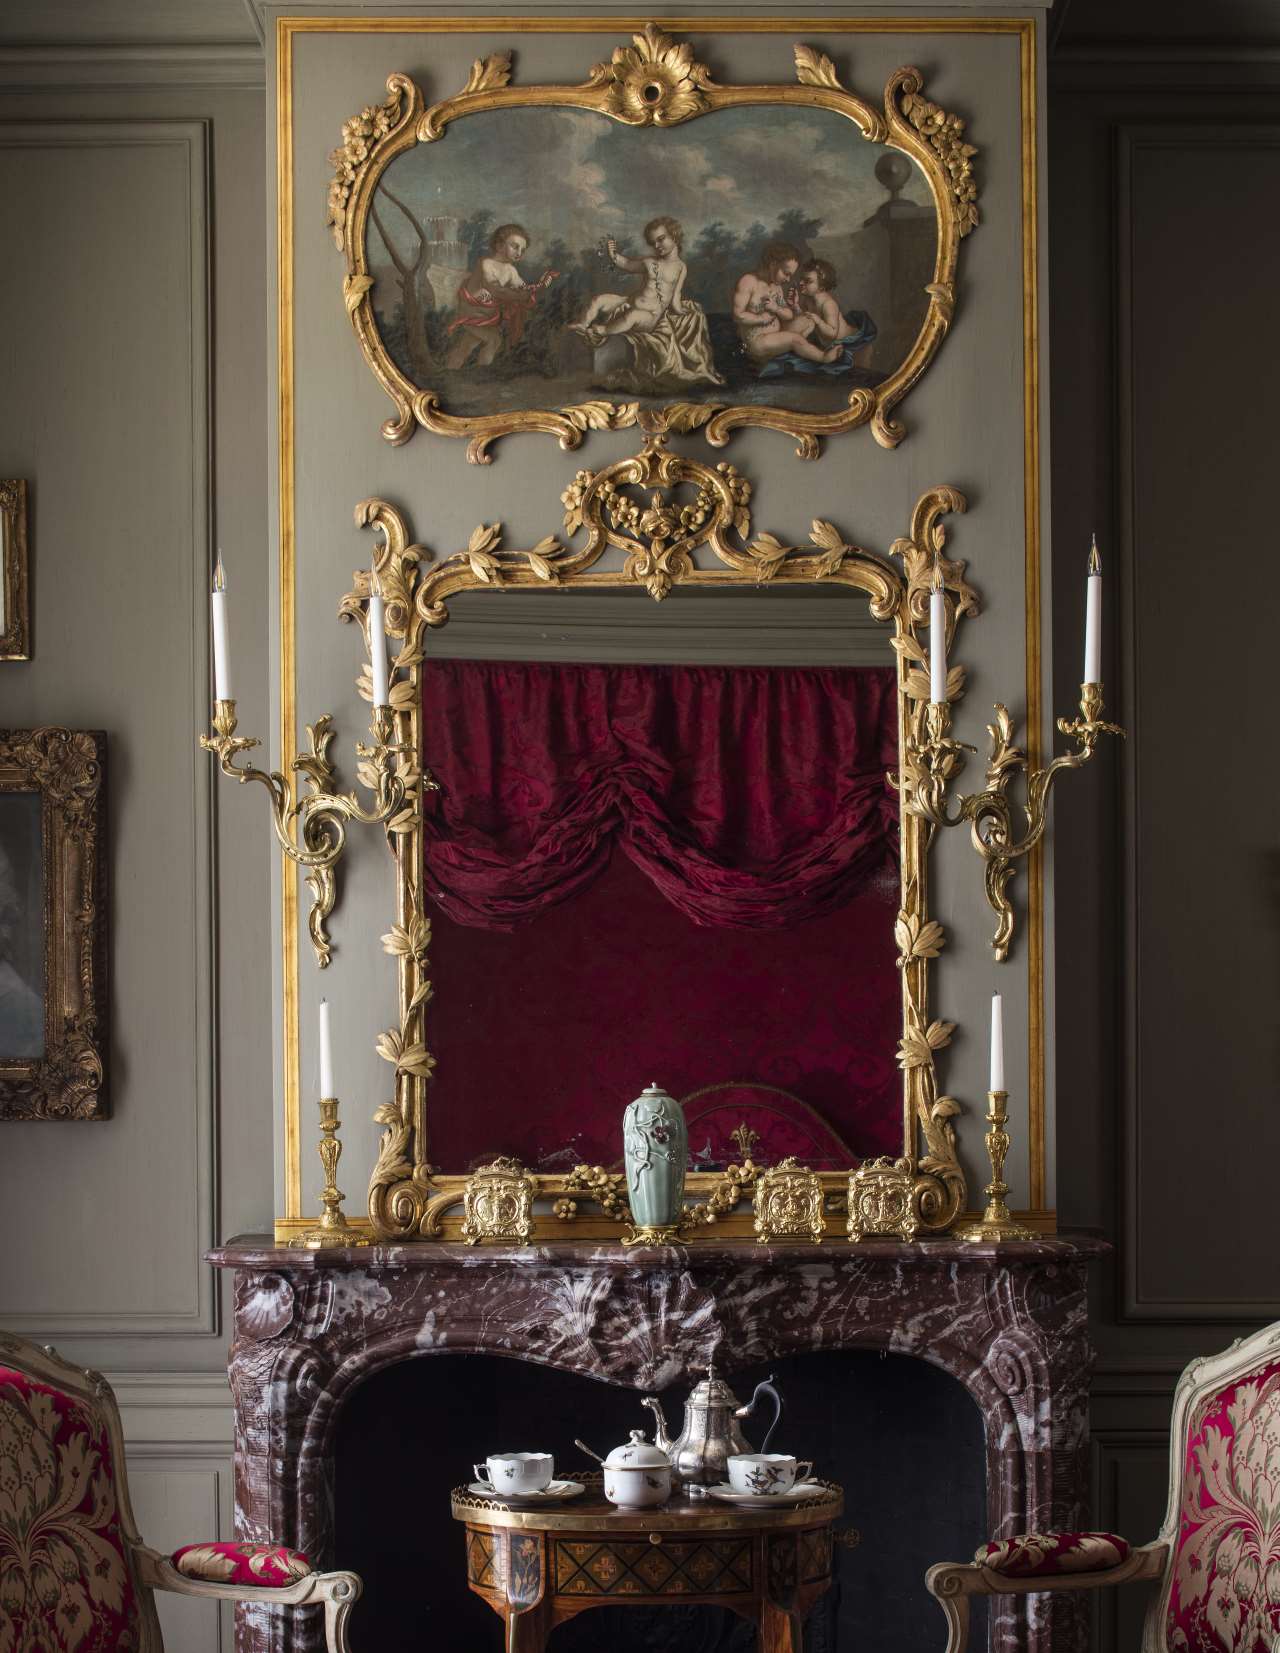 Photo by Bruno Ehrs for "Château de Villette. The splendor of French decor”, published by Flammarion.